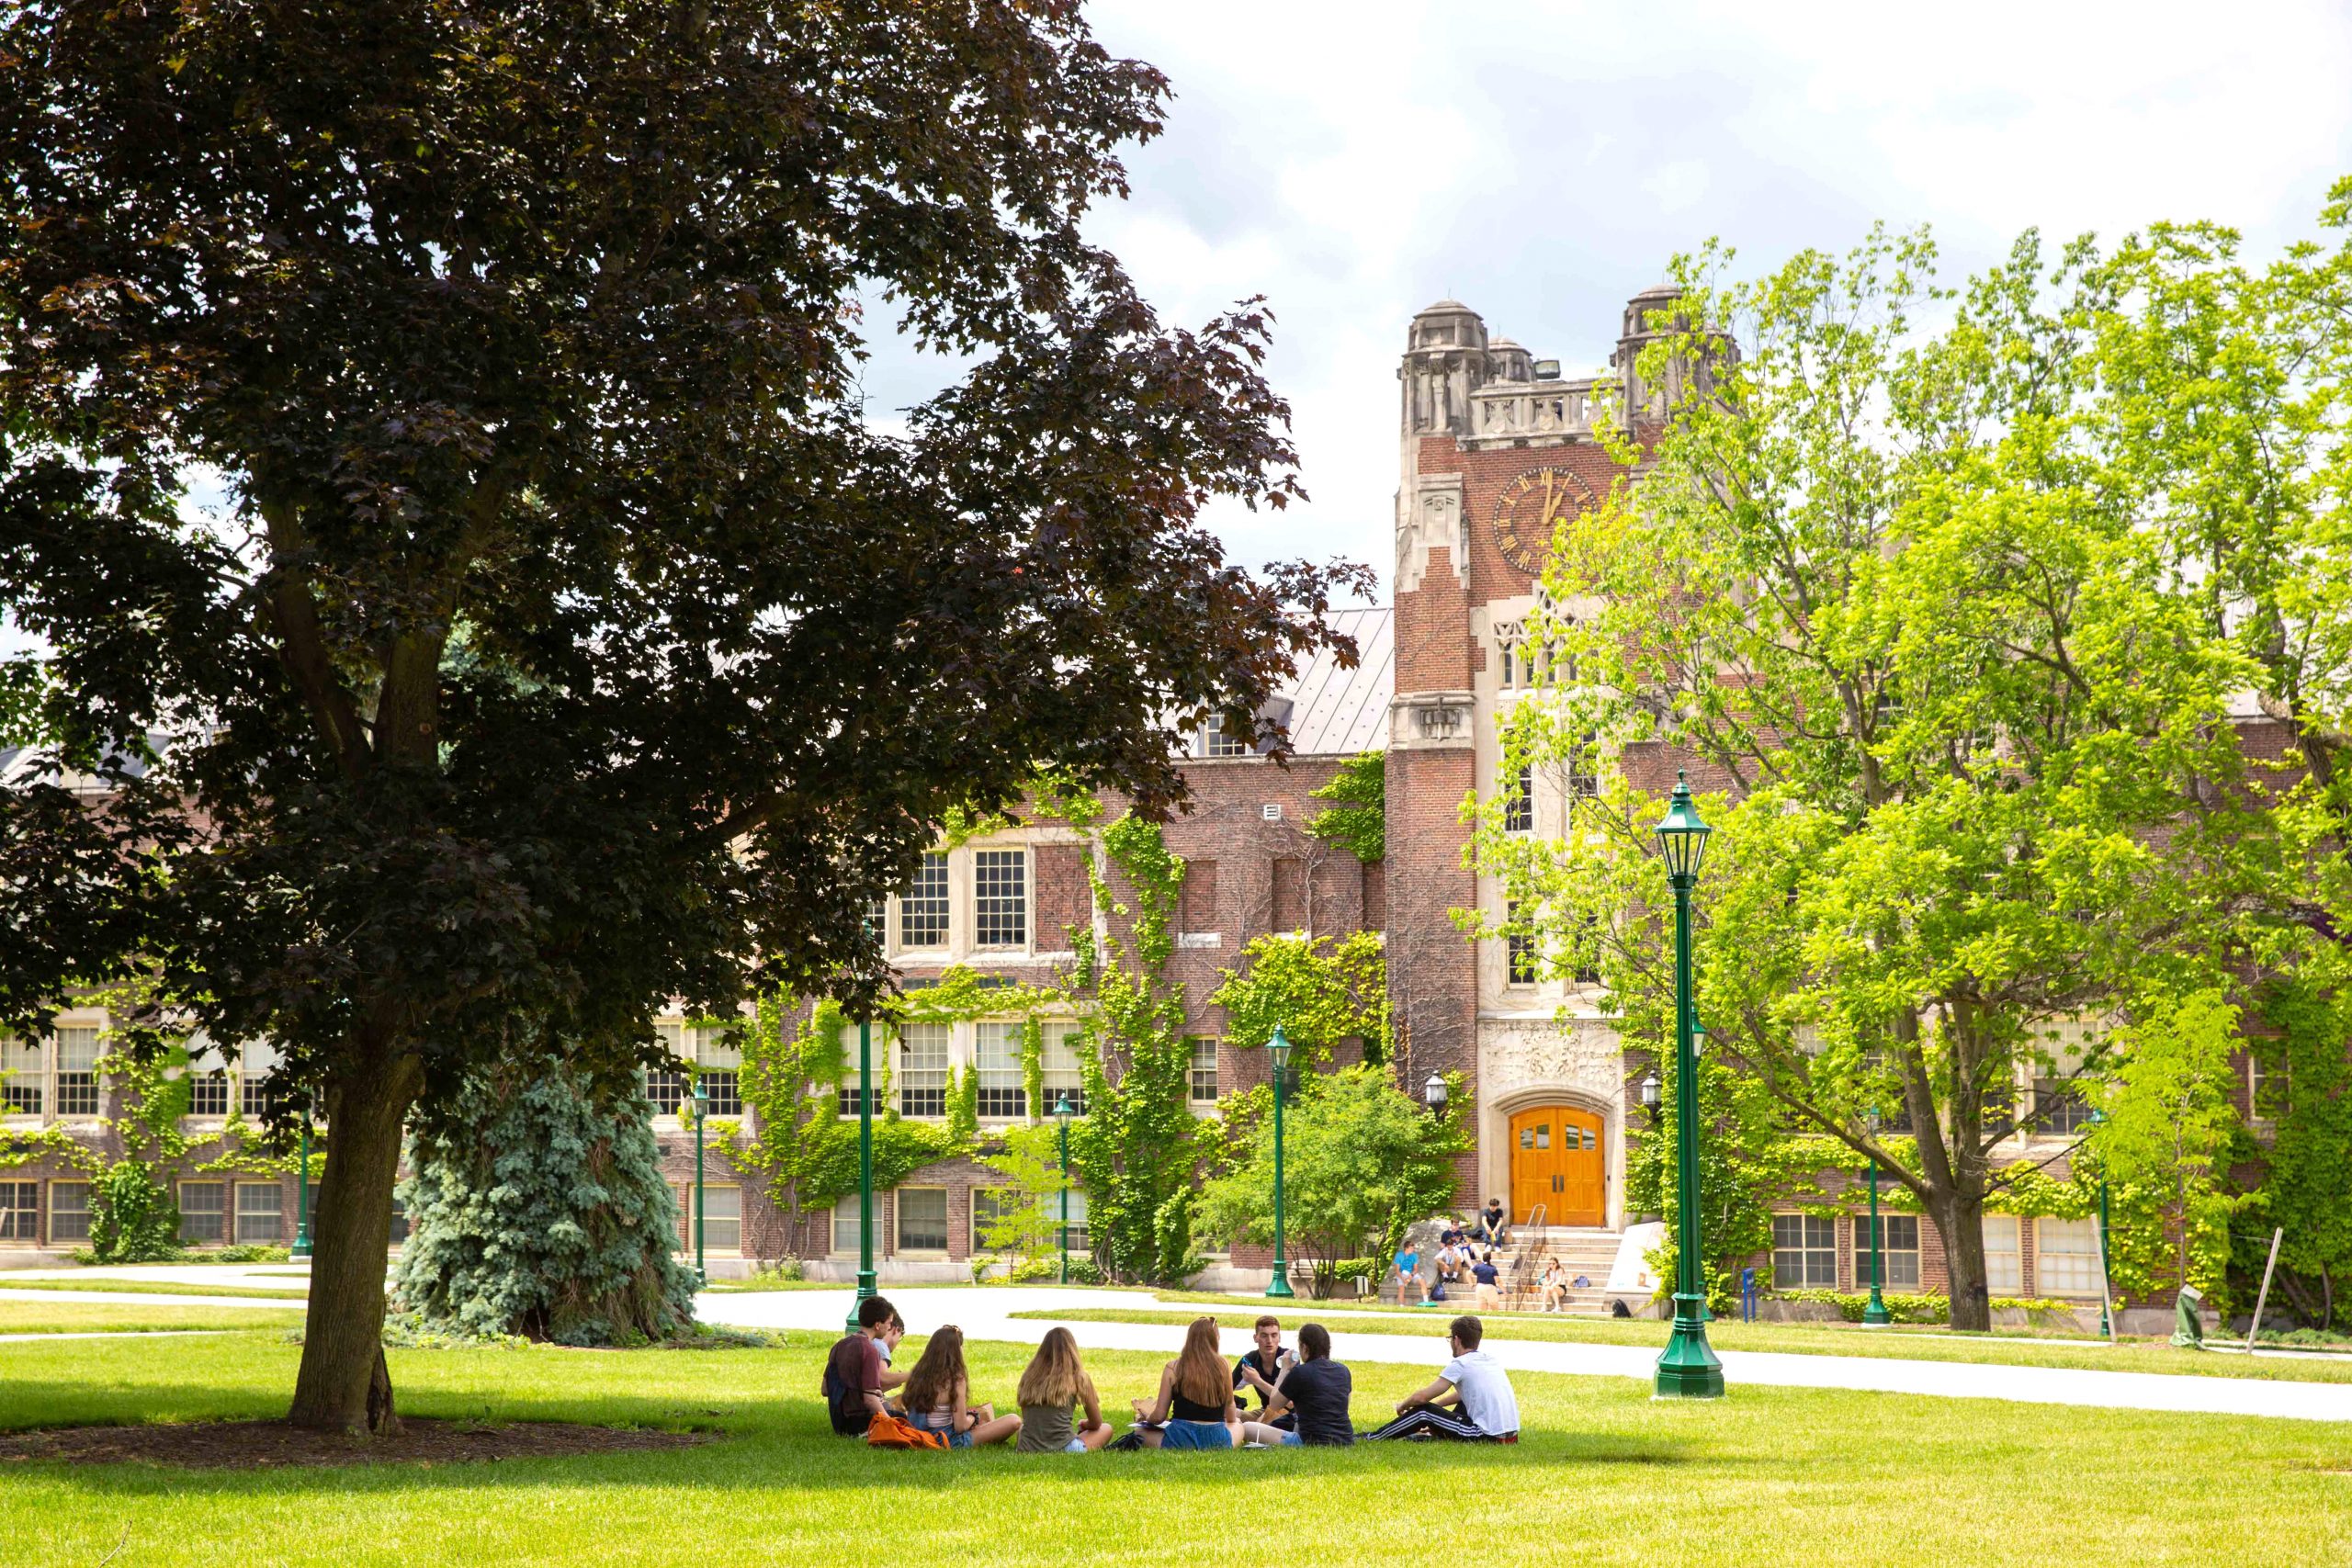 College students sit in a circle on the ground in the shade of a tree. Behind them is a brick building with a clock tower and a lamp post.